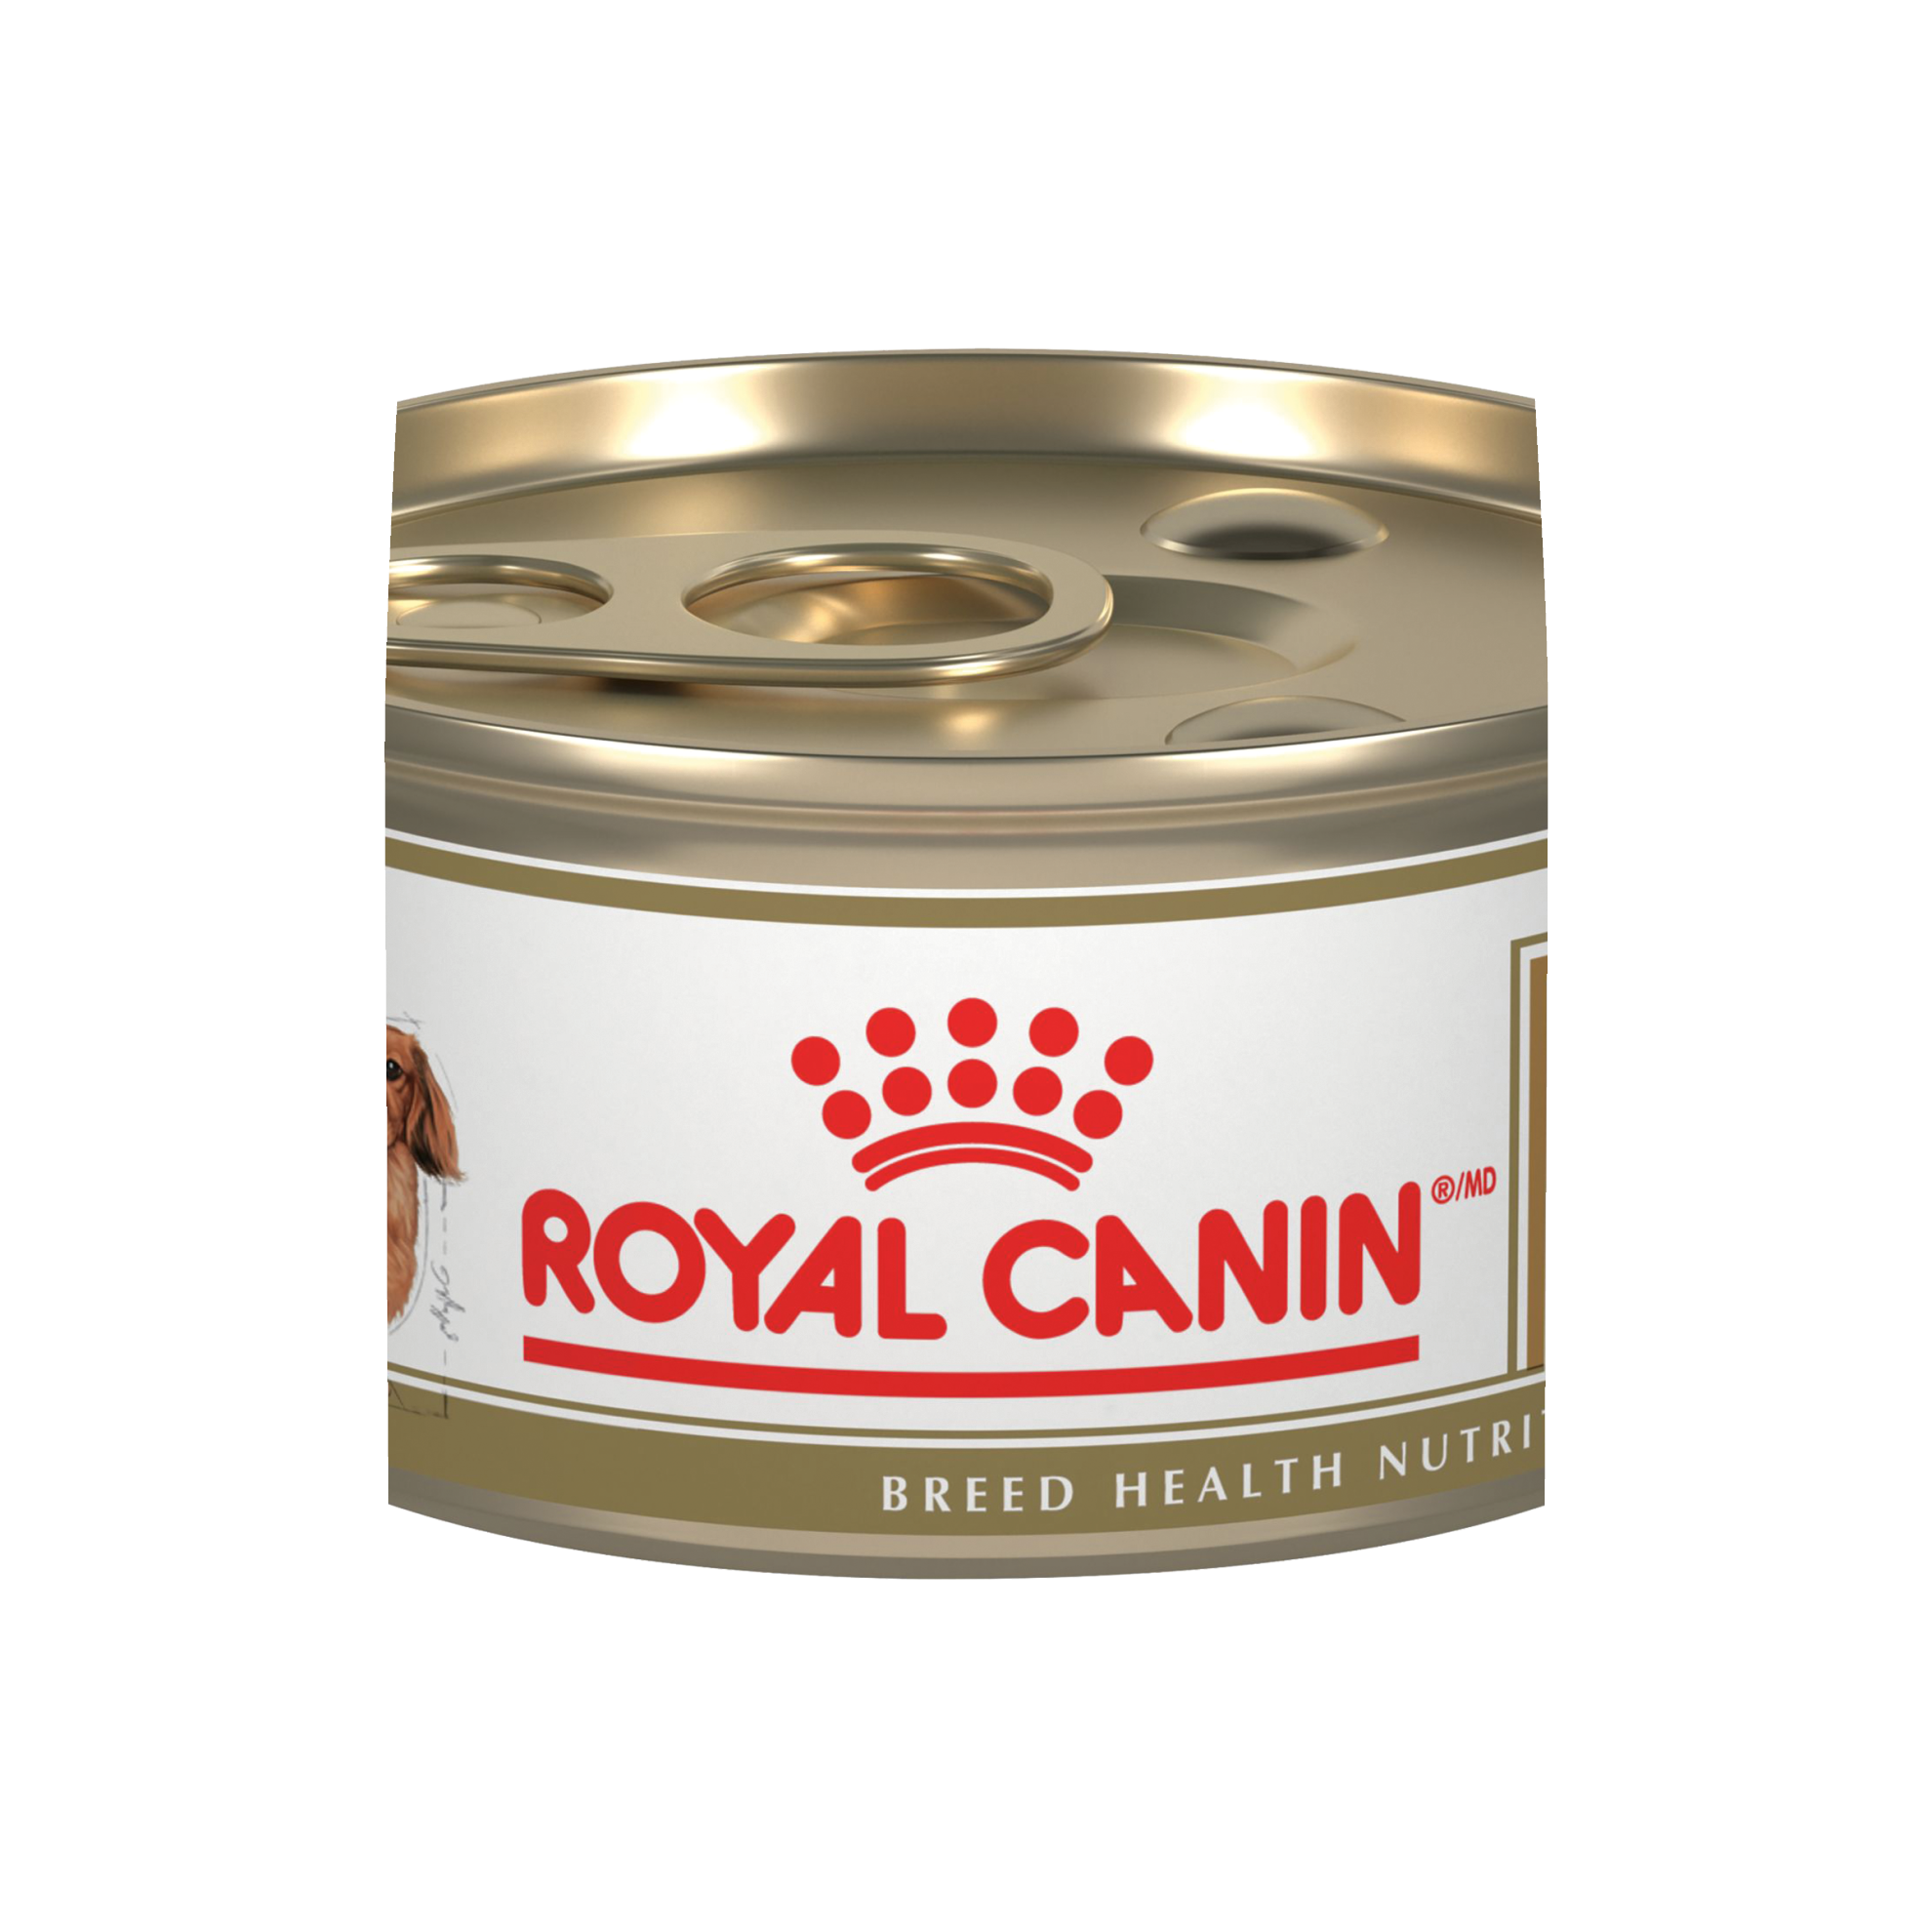 Dachshund Adult Loaf in Sauce Canned Dog Food